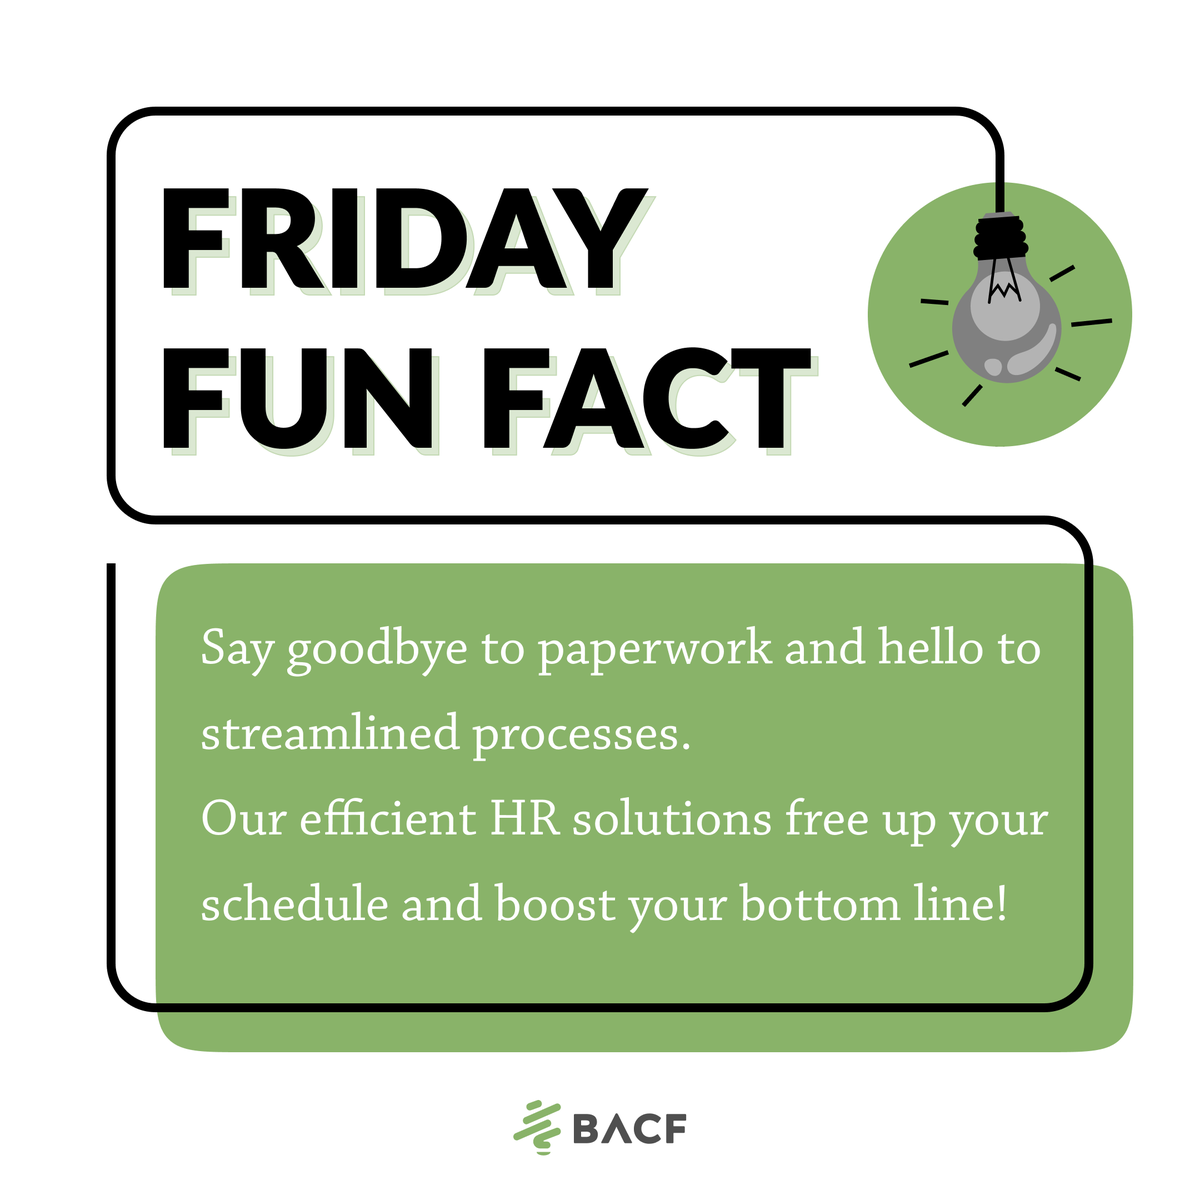 🌟 Friday Fun Fact 🌟 Our HR solutions = ⏰&💸savers!

Goodbye paperwork, hello freedom! Work smarter with our streamlined HR solutions. 💪💼

DM for more info. Let's make this Friday fun! 🙌🎉

#FridayFunFact #HRsolutions #SaveTimeAndMoney